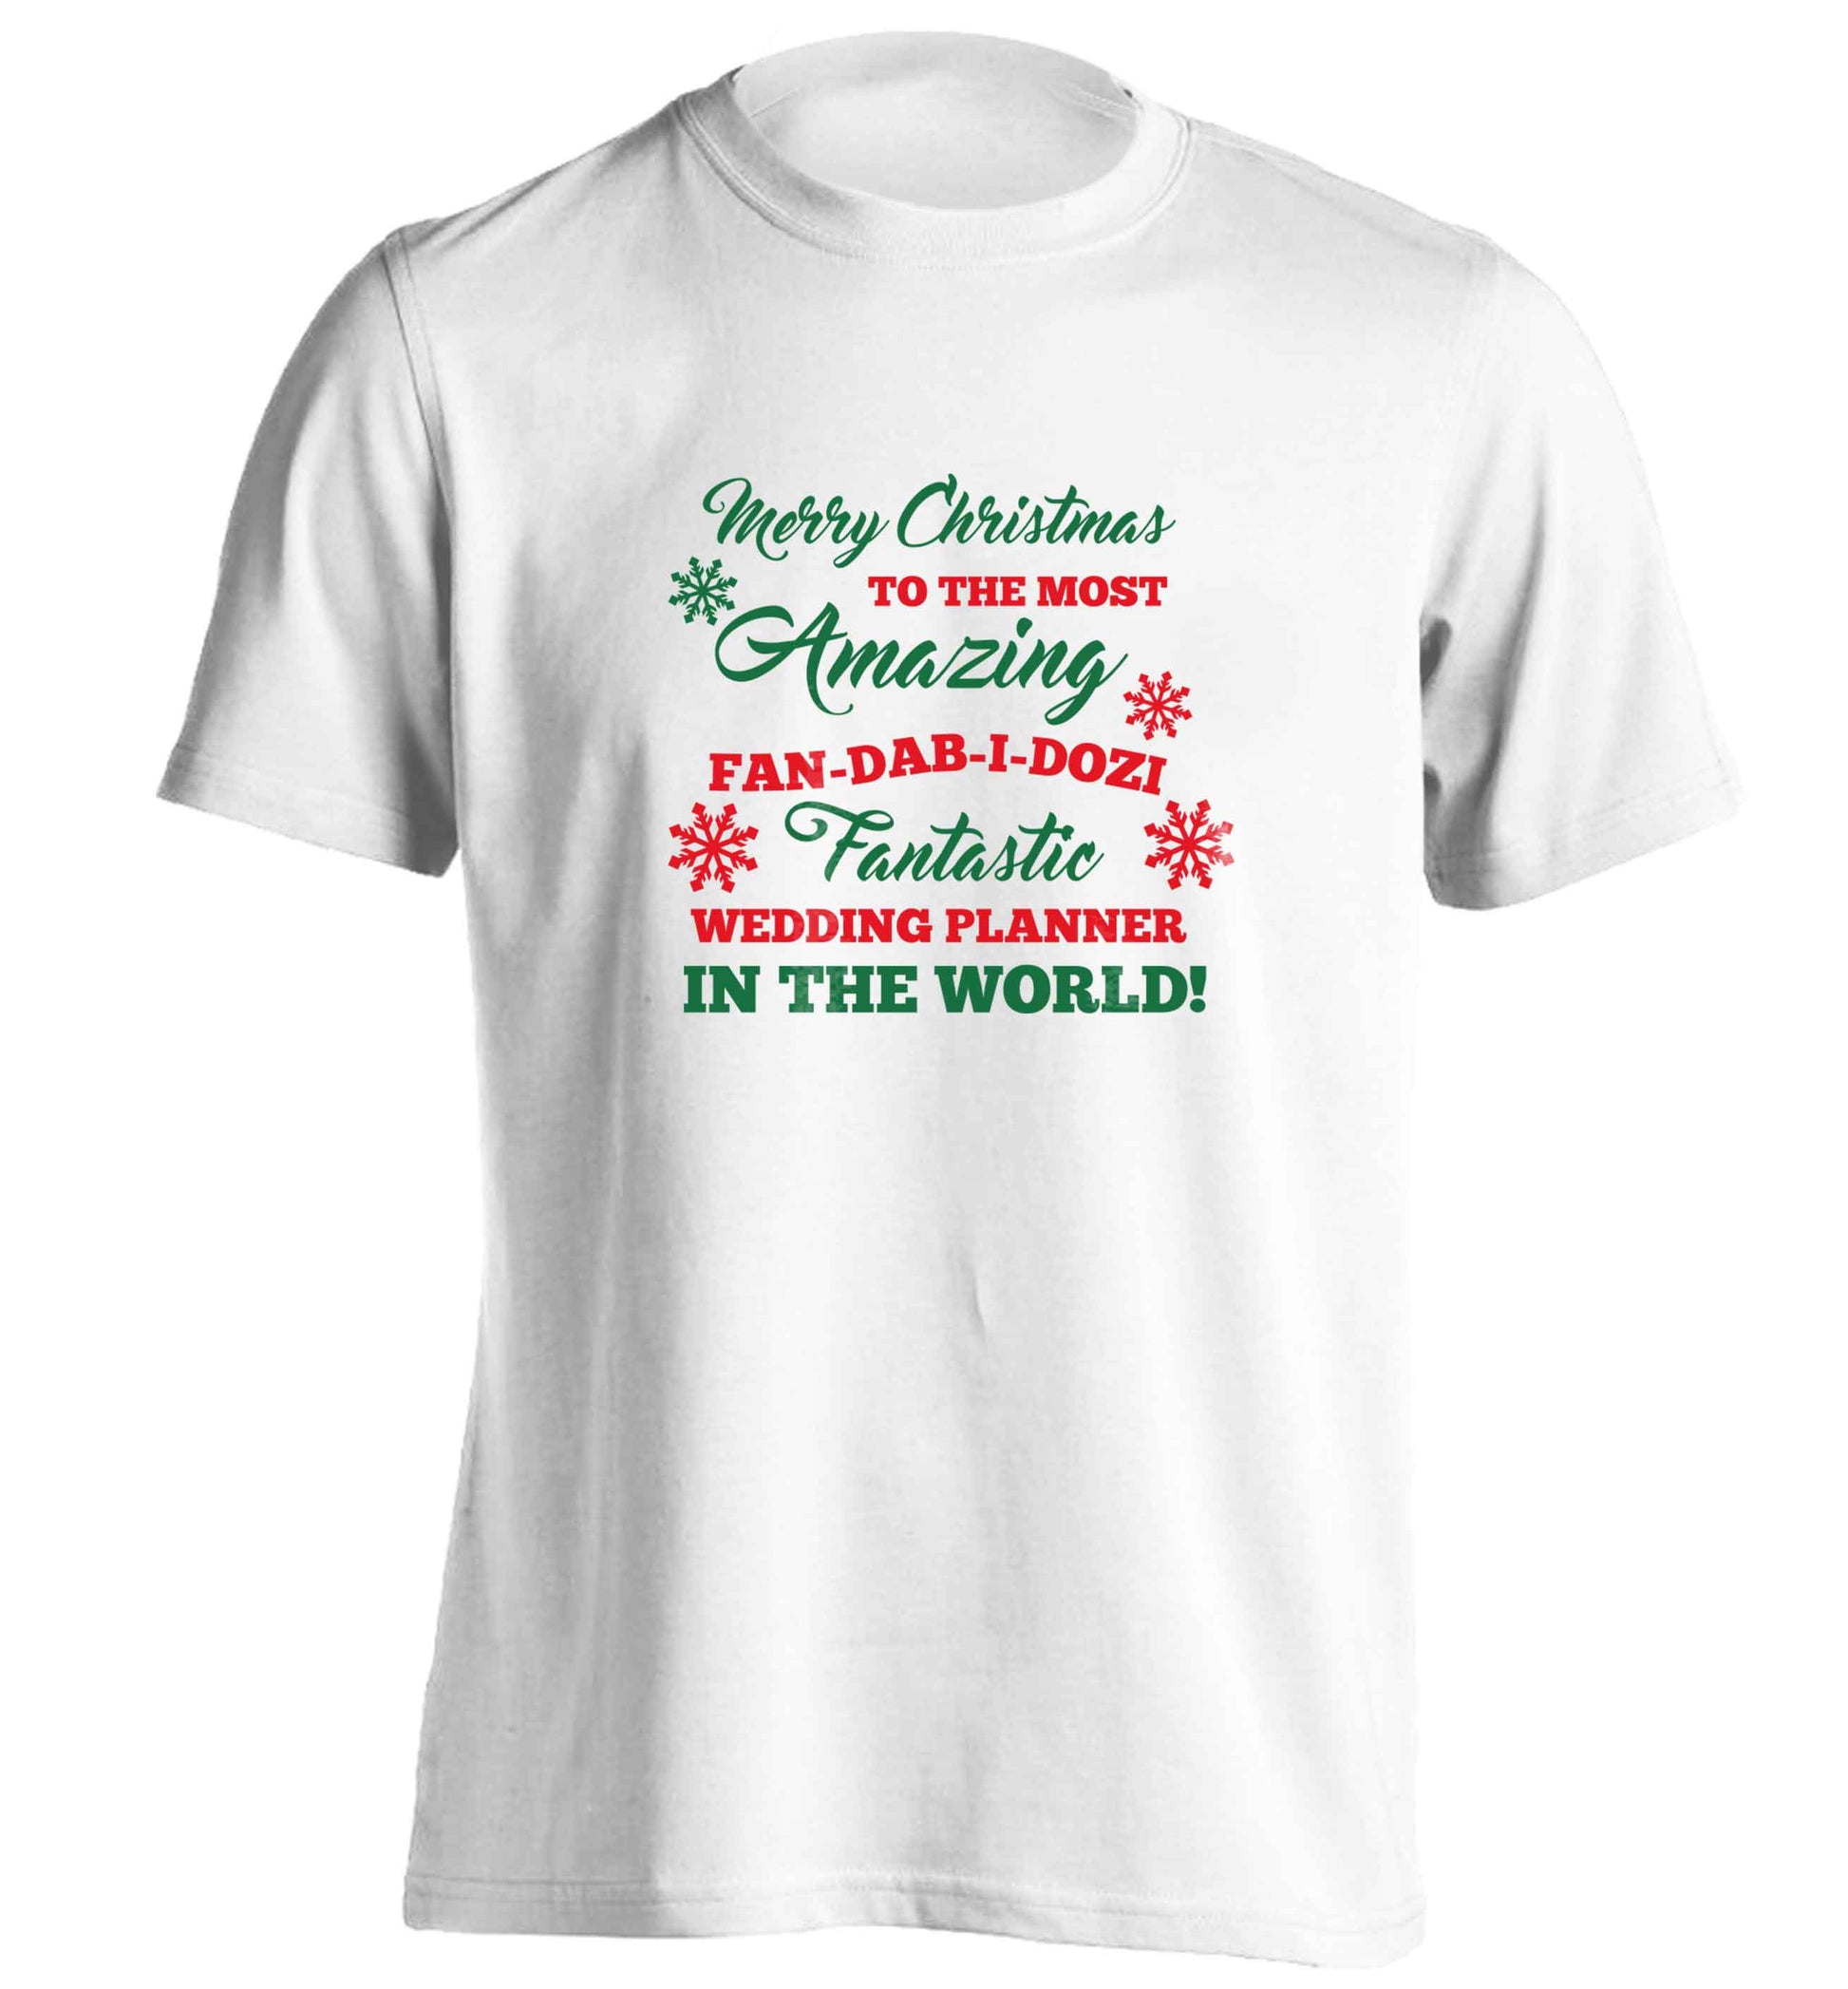 Merry Christmas to the most amazing fan-dab-i-dozi fantasic wedding planner in the world adults unisex white Tshirt 2XL